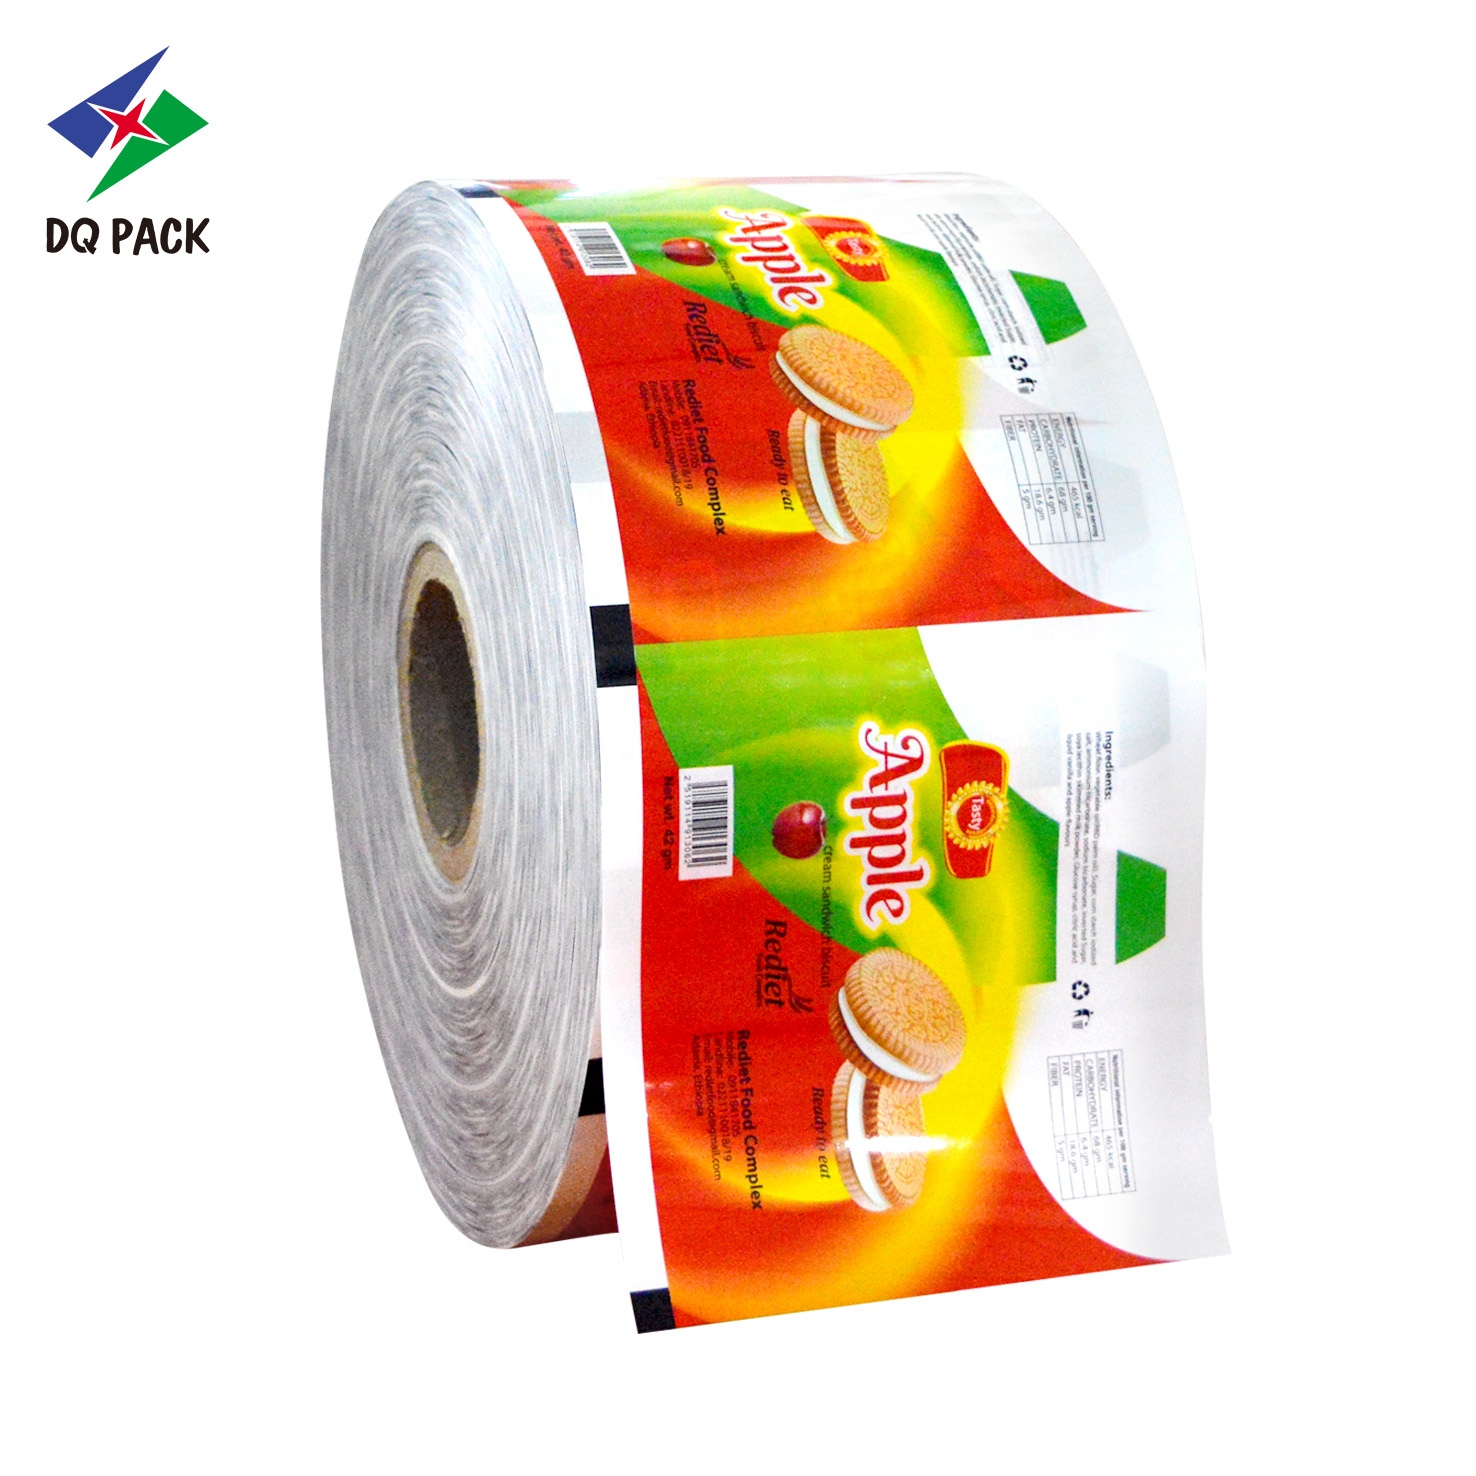 DQ PACK Pearlizd BOPP Lamination Biscuit Packaging Wrapper Film